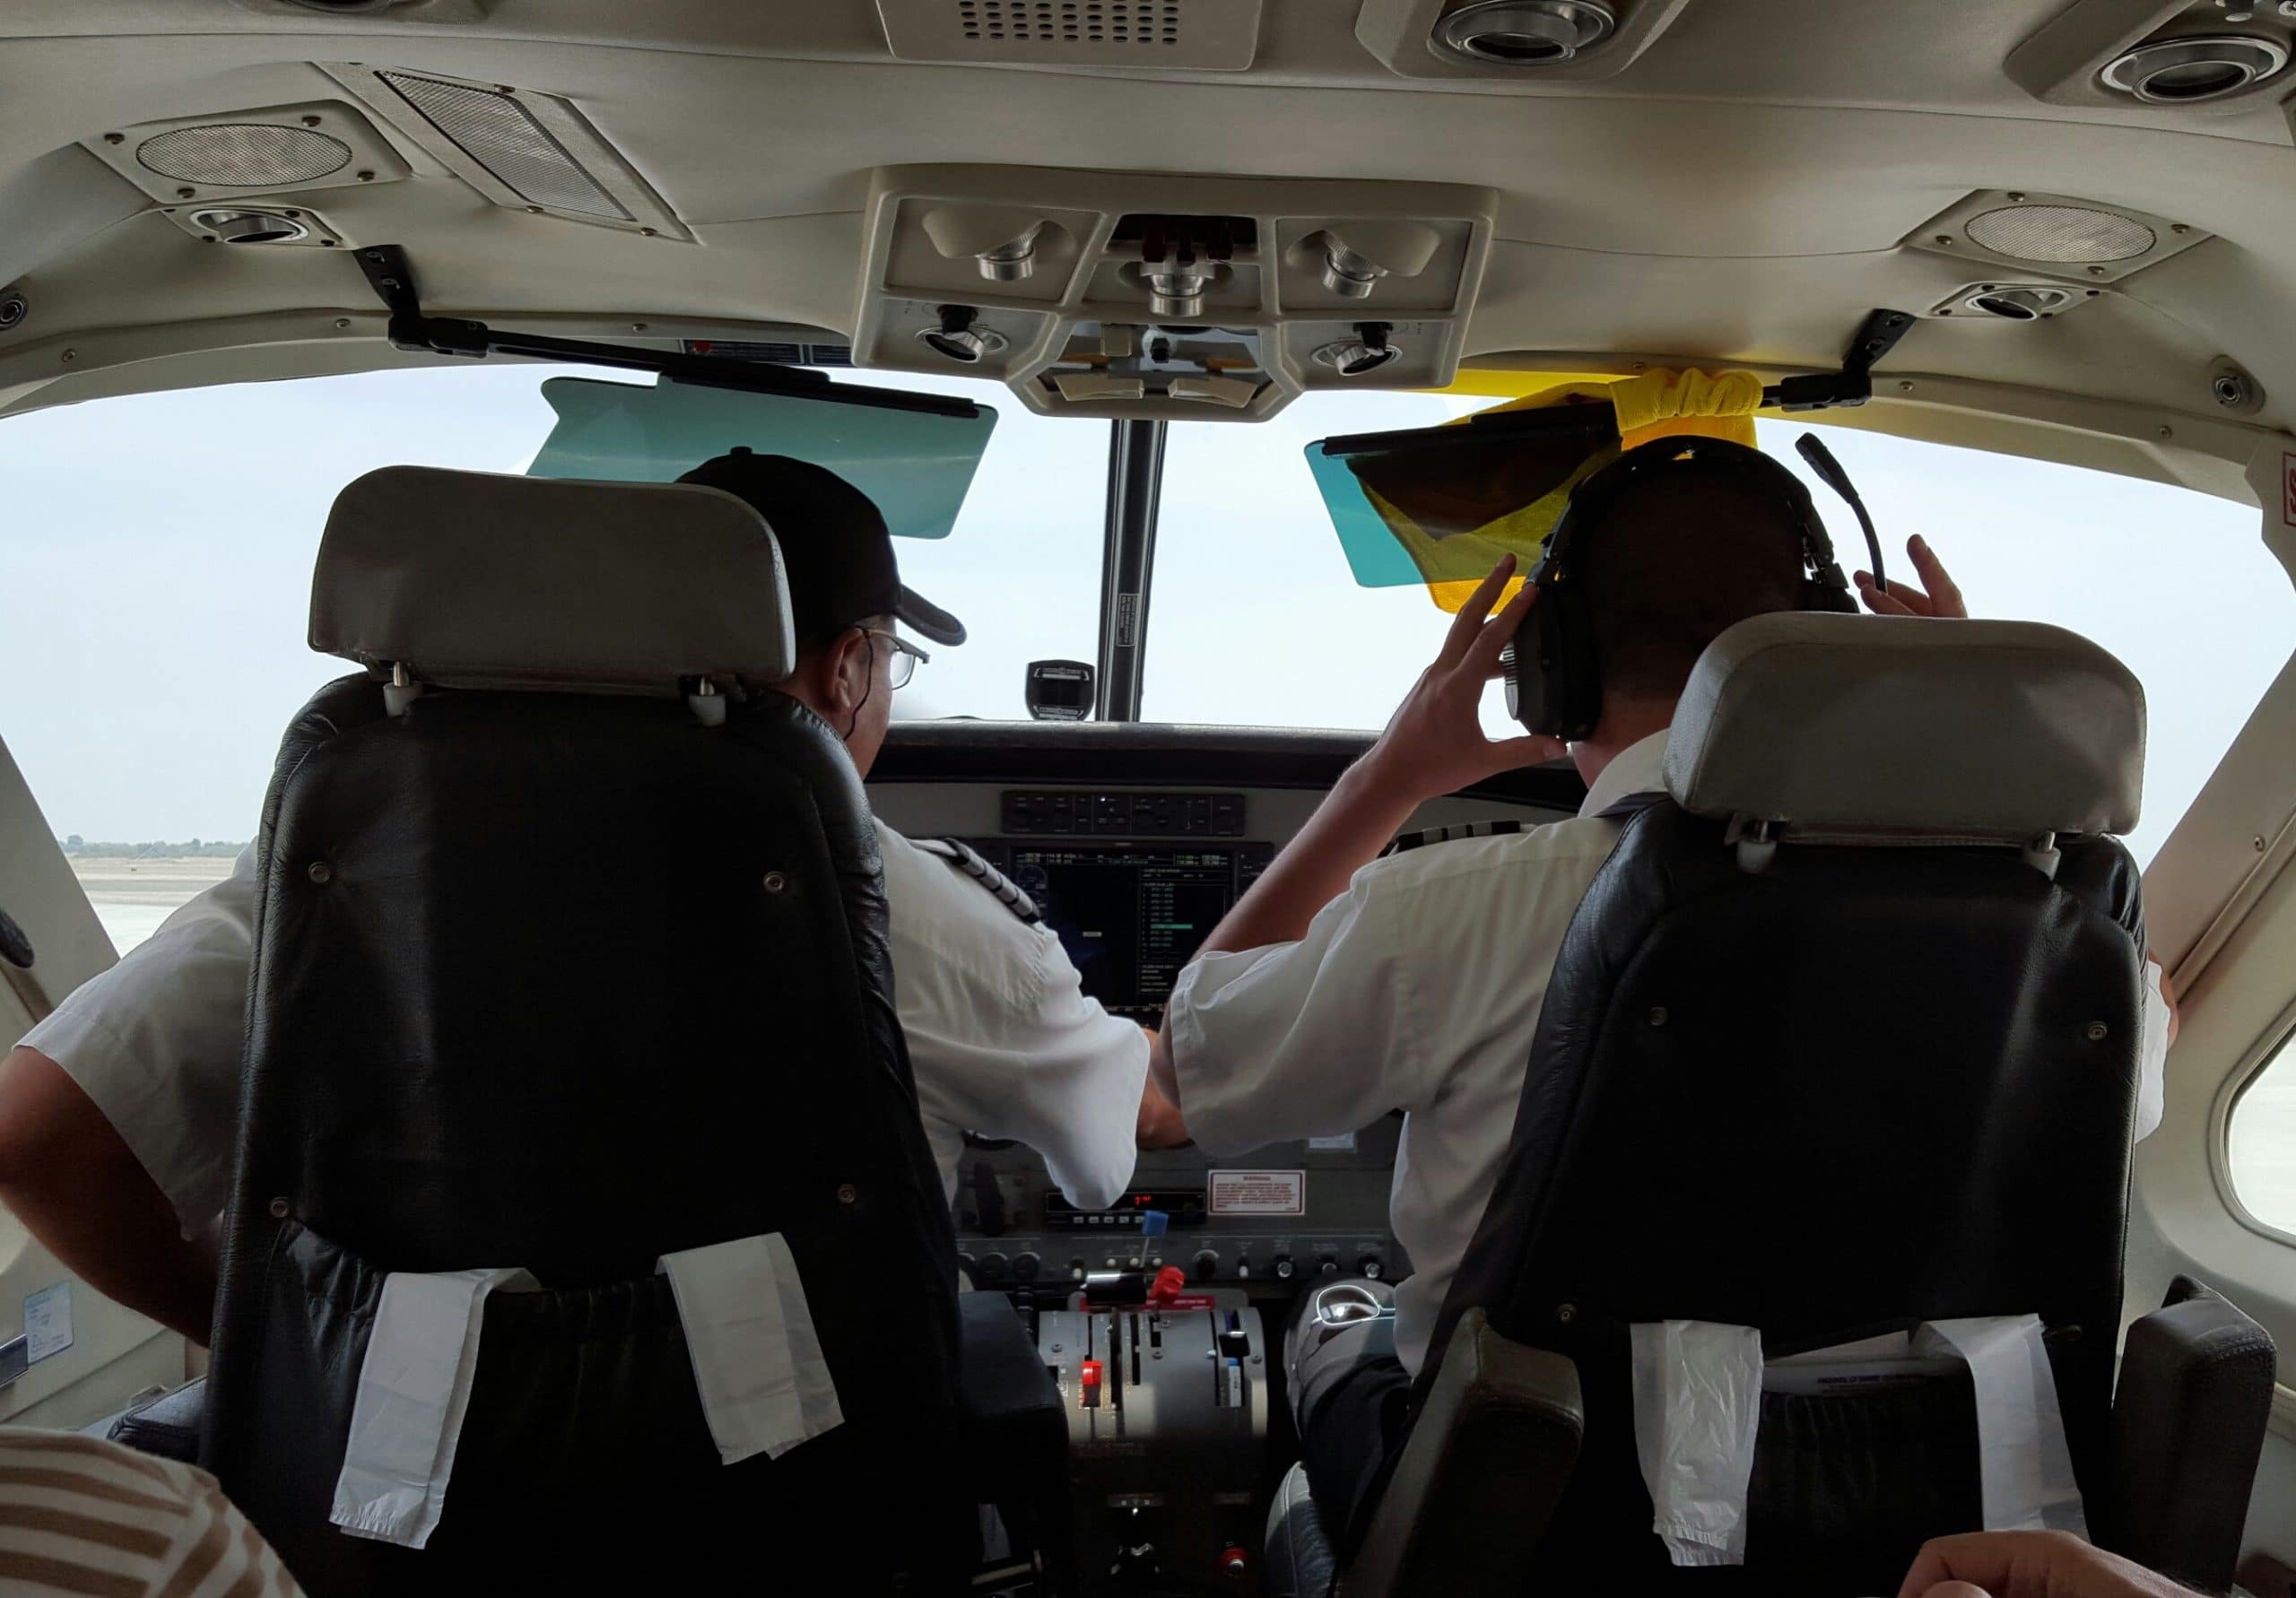 Do pilots pay more for life insurance?